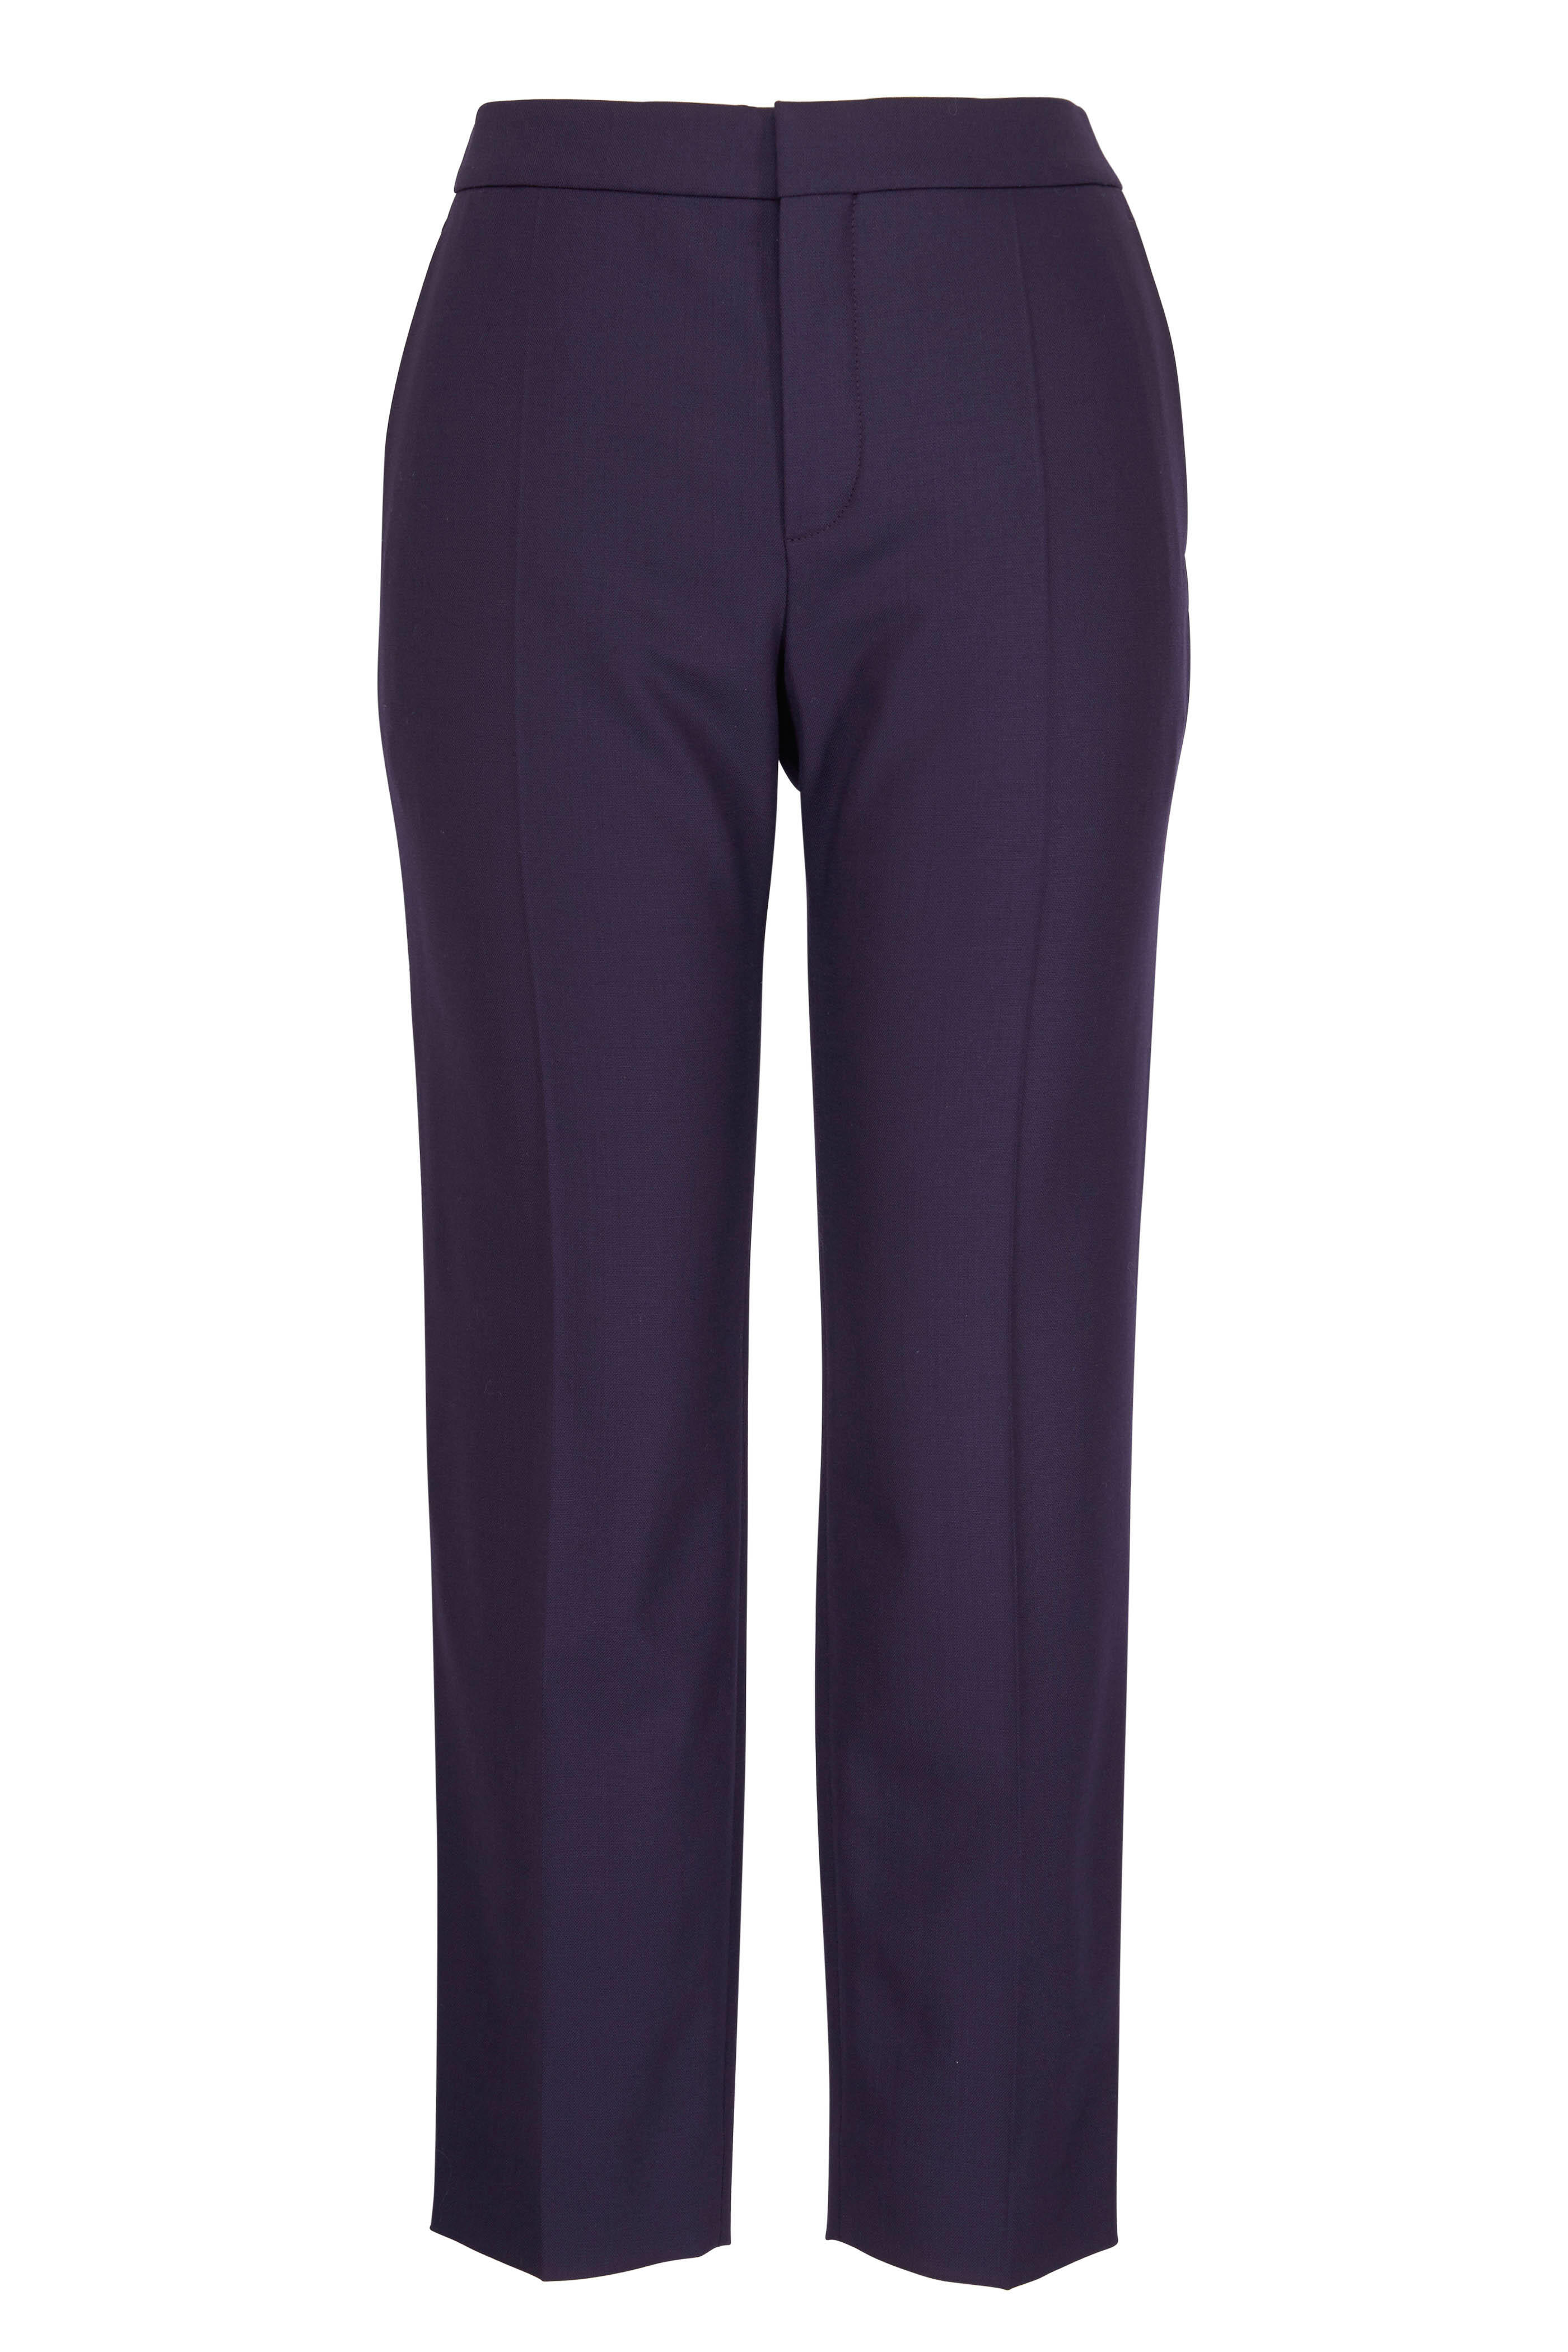 Chloé - Moonless Night Cropped Trousers | Mitchell Stores